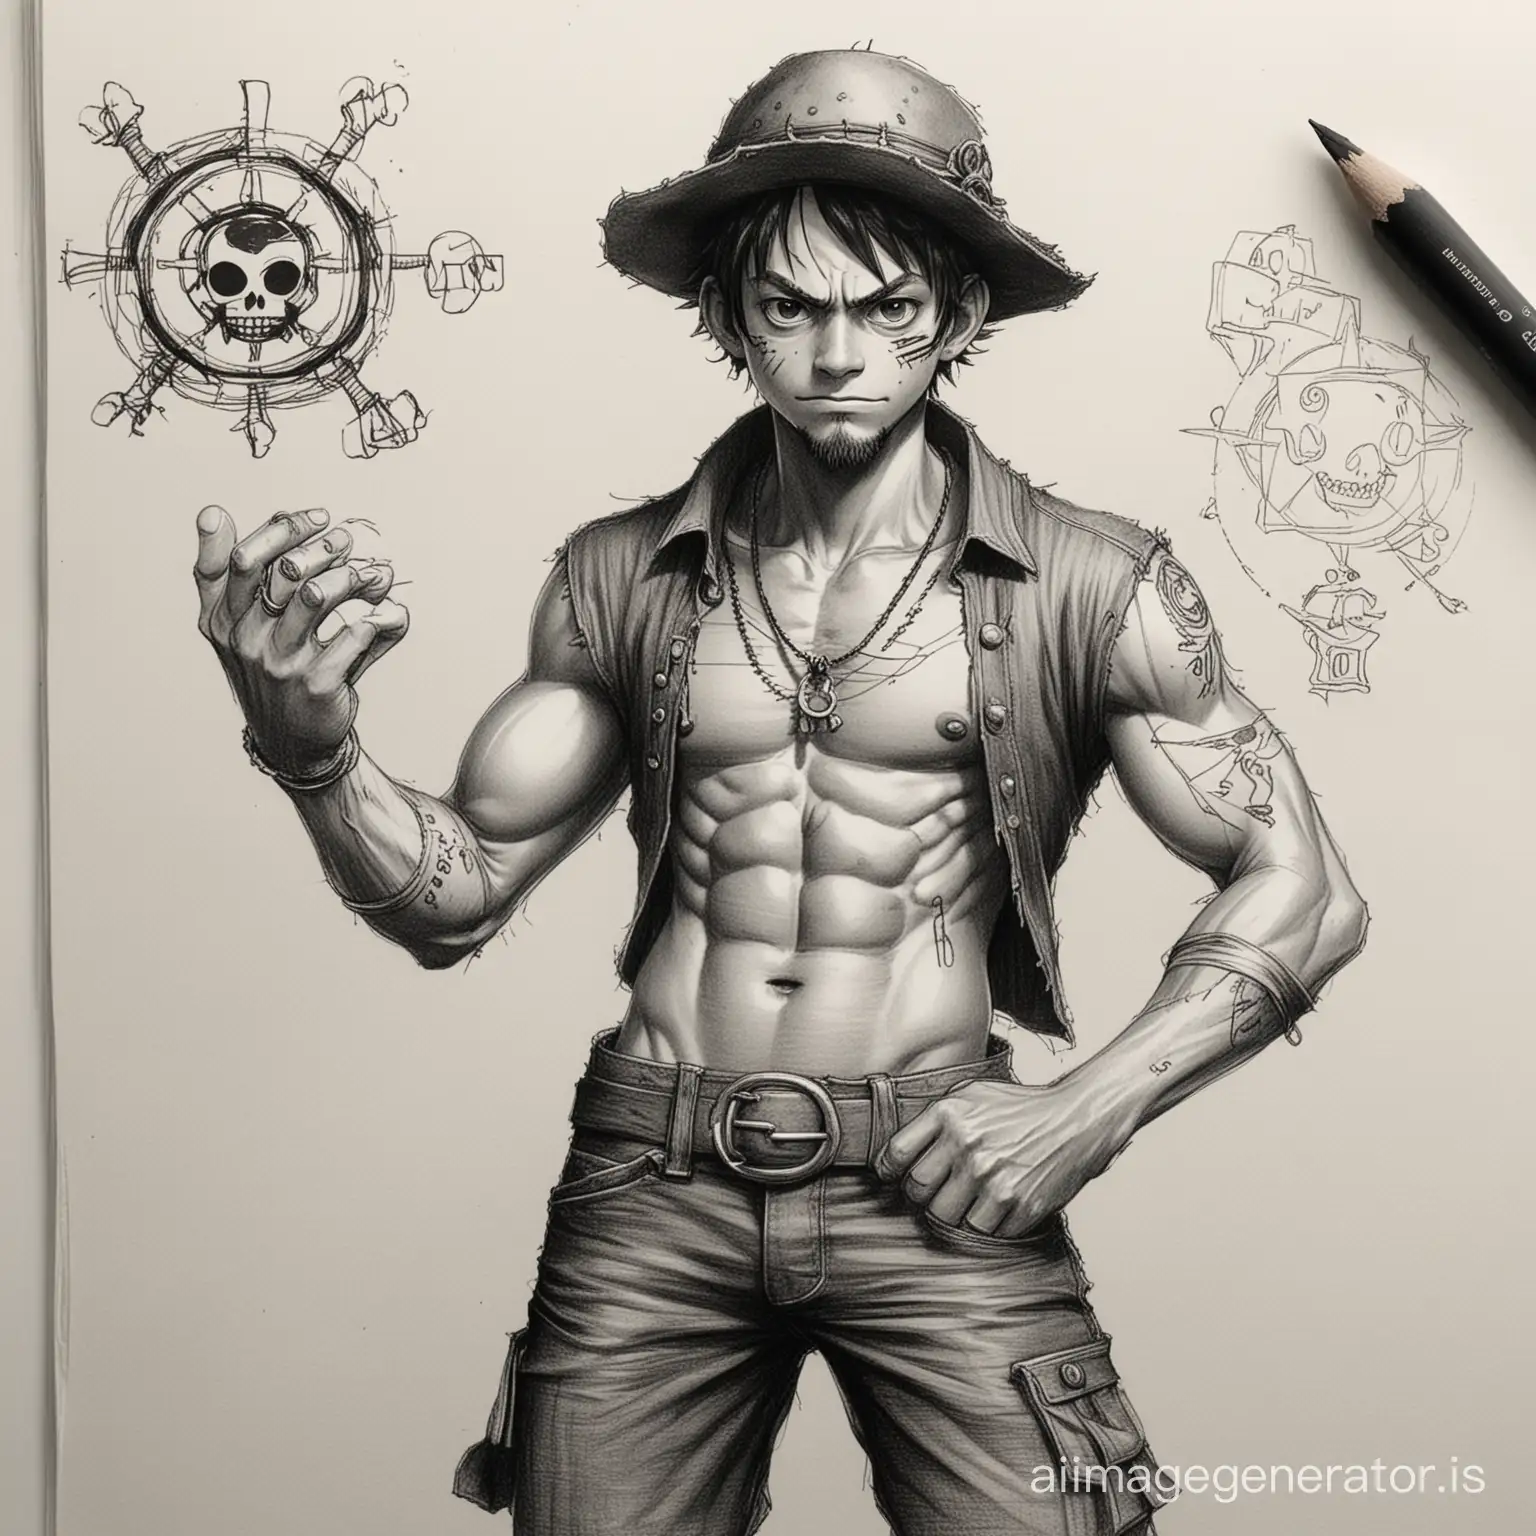 Gritty-Anime-Pirate-Sketch-with-Mystic-Symbols